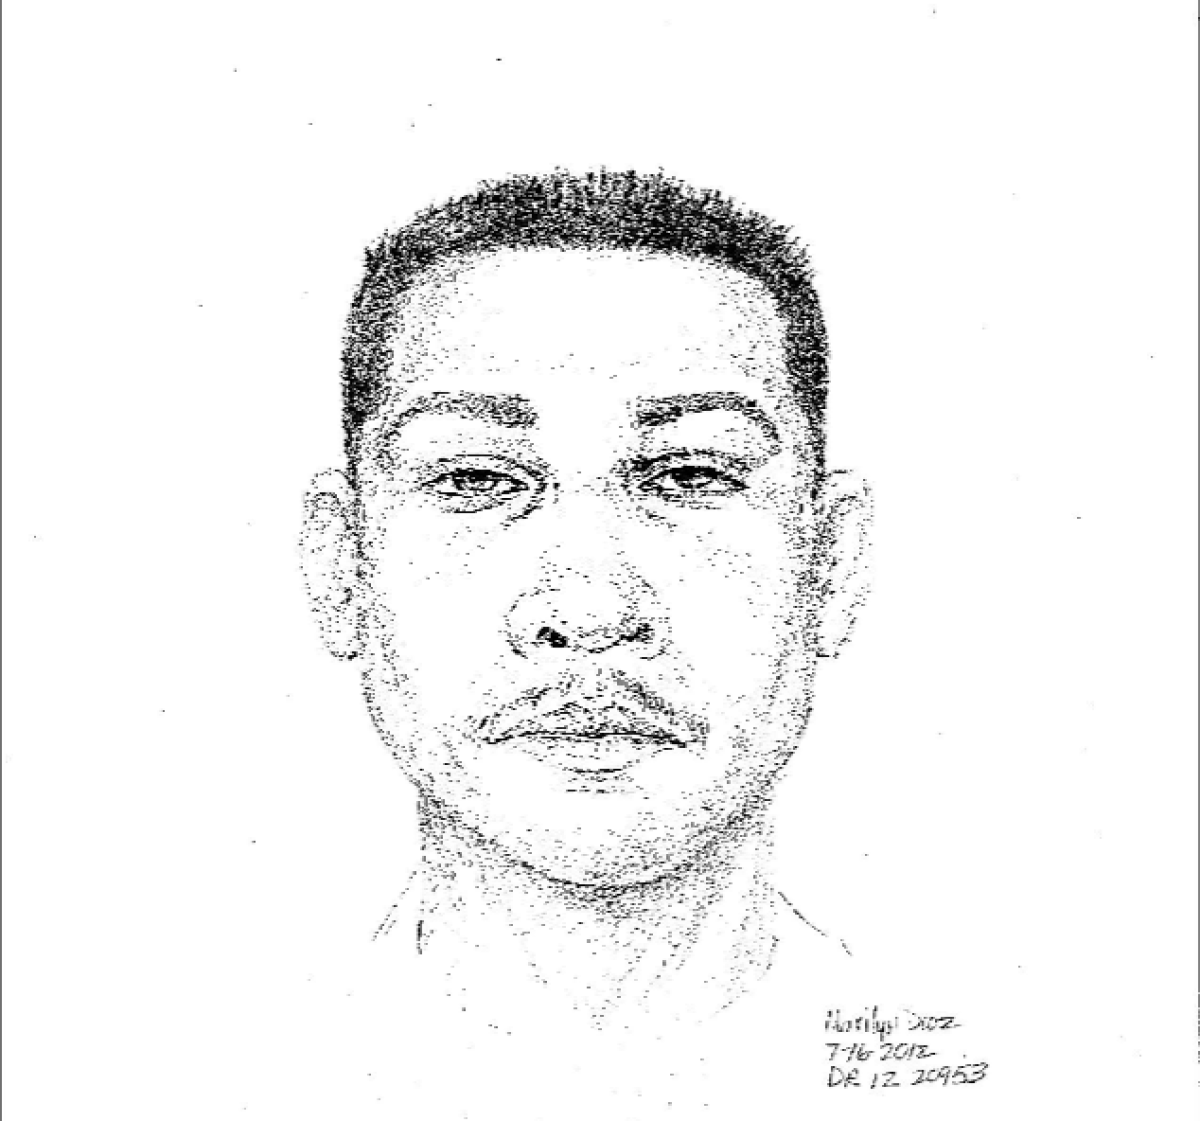 Shortly after the 2012 rape, police released this sketch of the suspect.